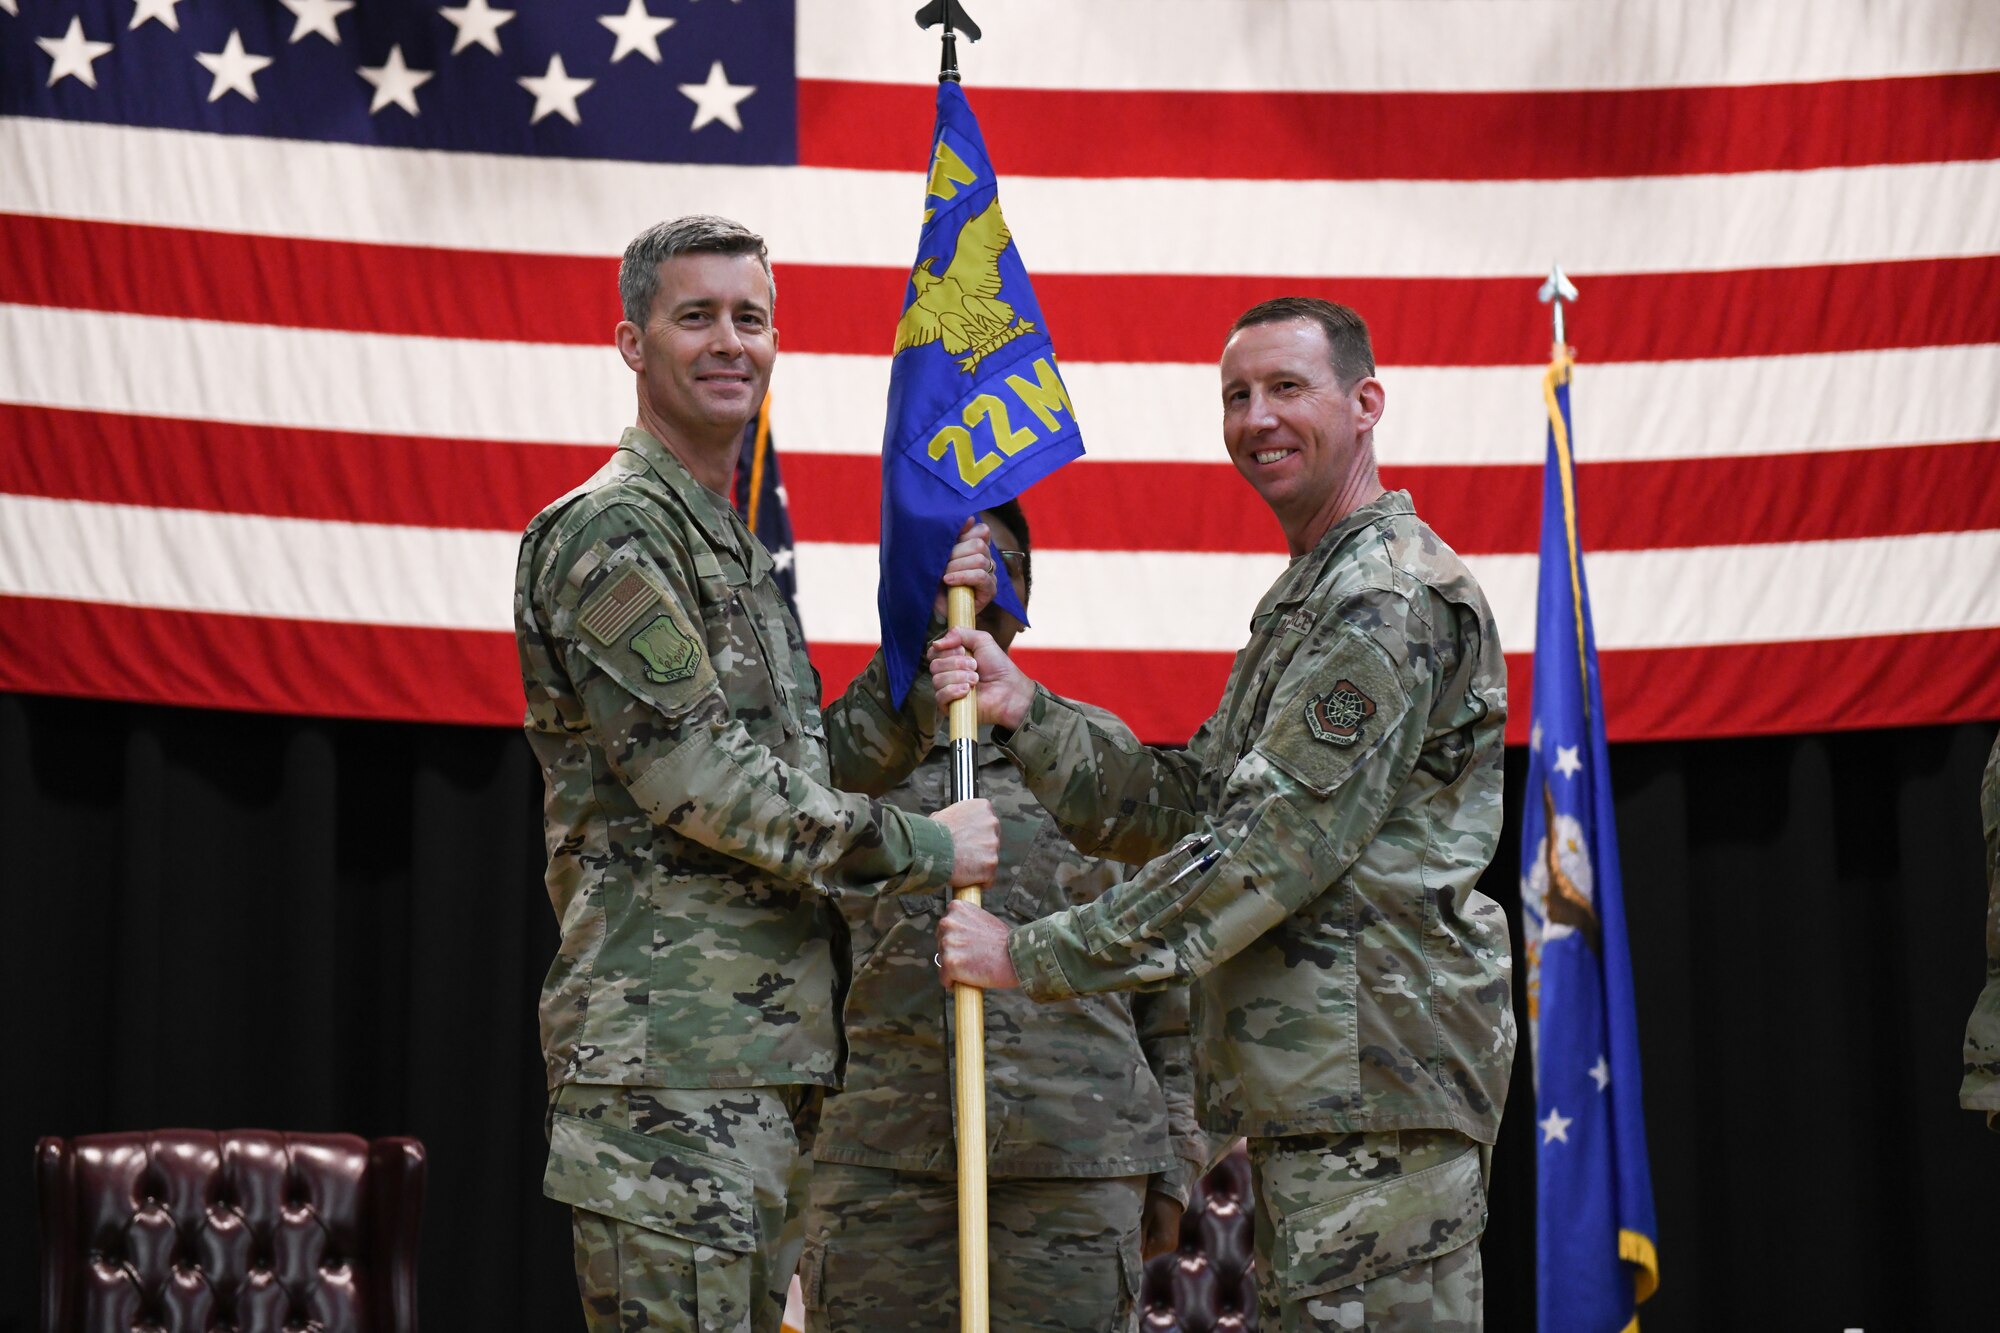 Col. Robert Kelly, 22nd Mission Support Group out-bound commander, relinquishes command during a change of command ceremony June 17, 2021, at McConnell Air Force Base, Kansas. Command was relinquished to Col. Heath Frye, 22nd MSG commander. The ceremony is a time-honored tradition that symbolizes a transfer of authority. (U.S. Air Force photo by Senior Airman Alan Ricker)